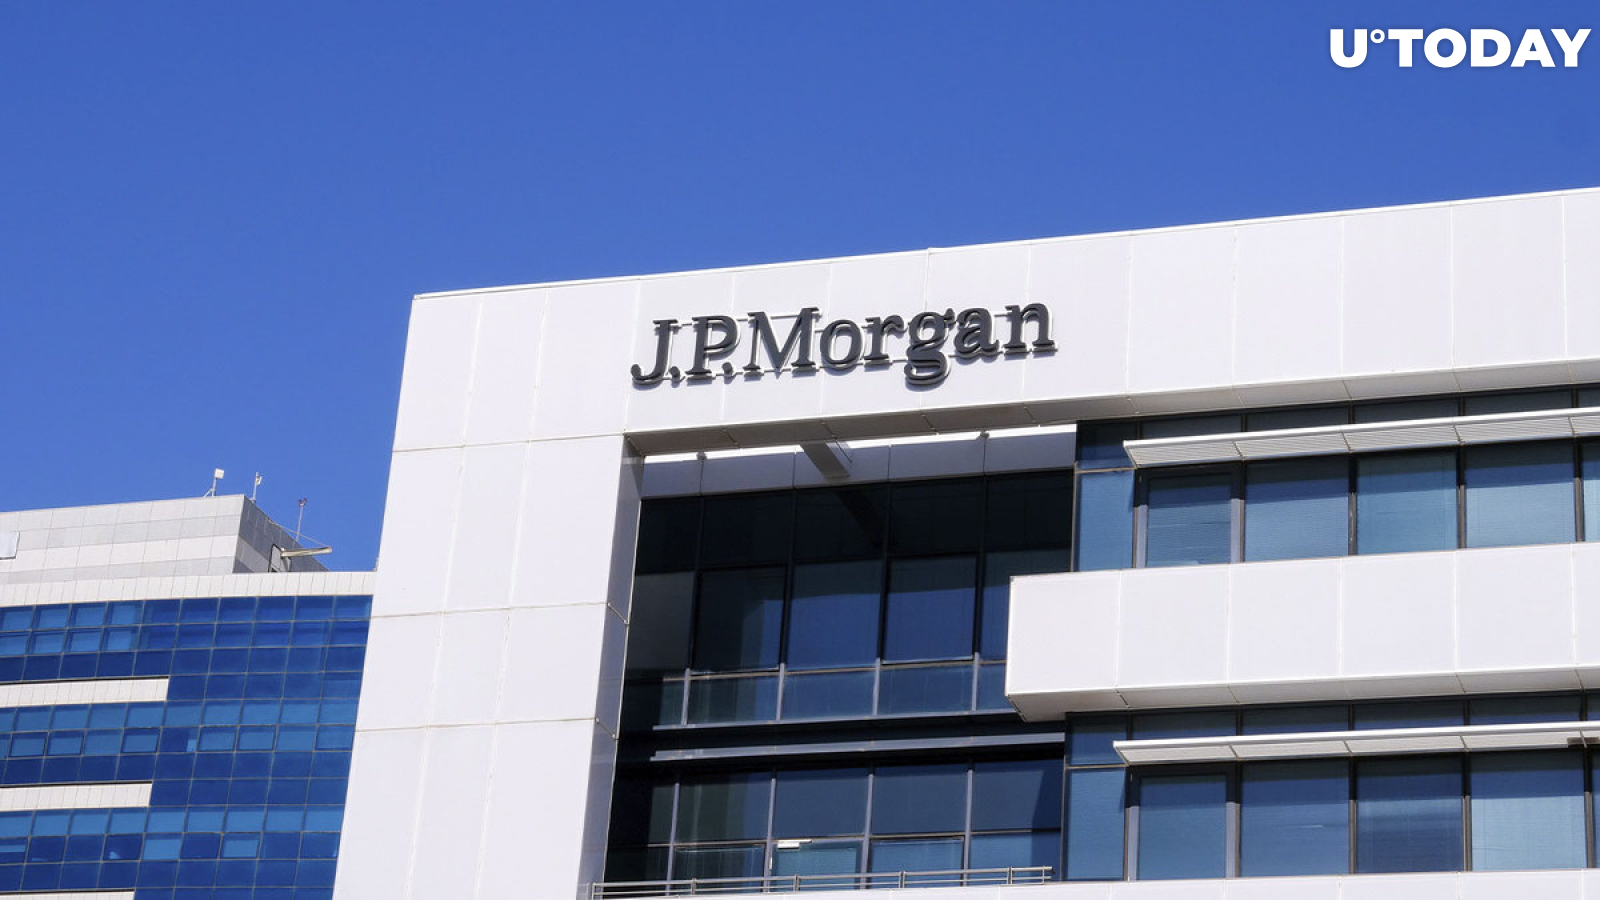 J.P.Morgan Conducts On-Chain Transaction as DeFi Pilot Approved in Singapore